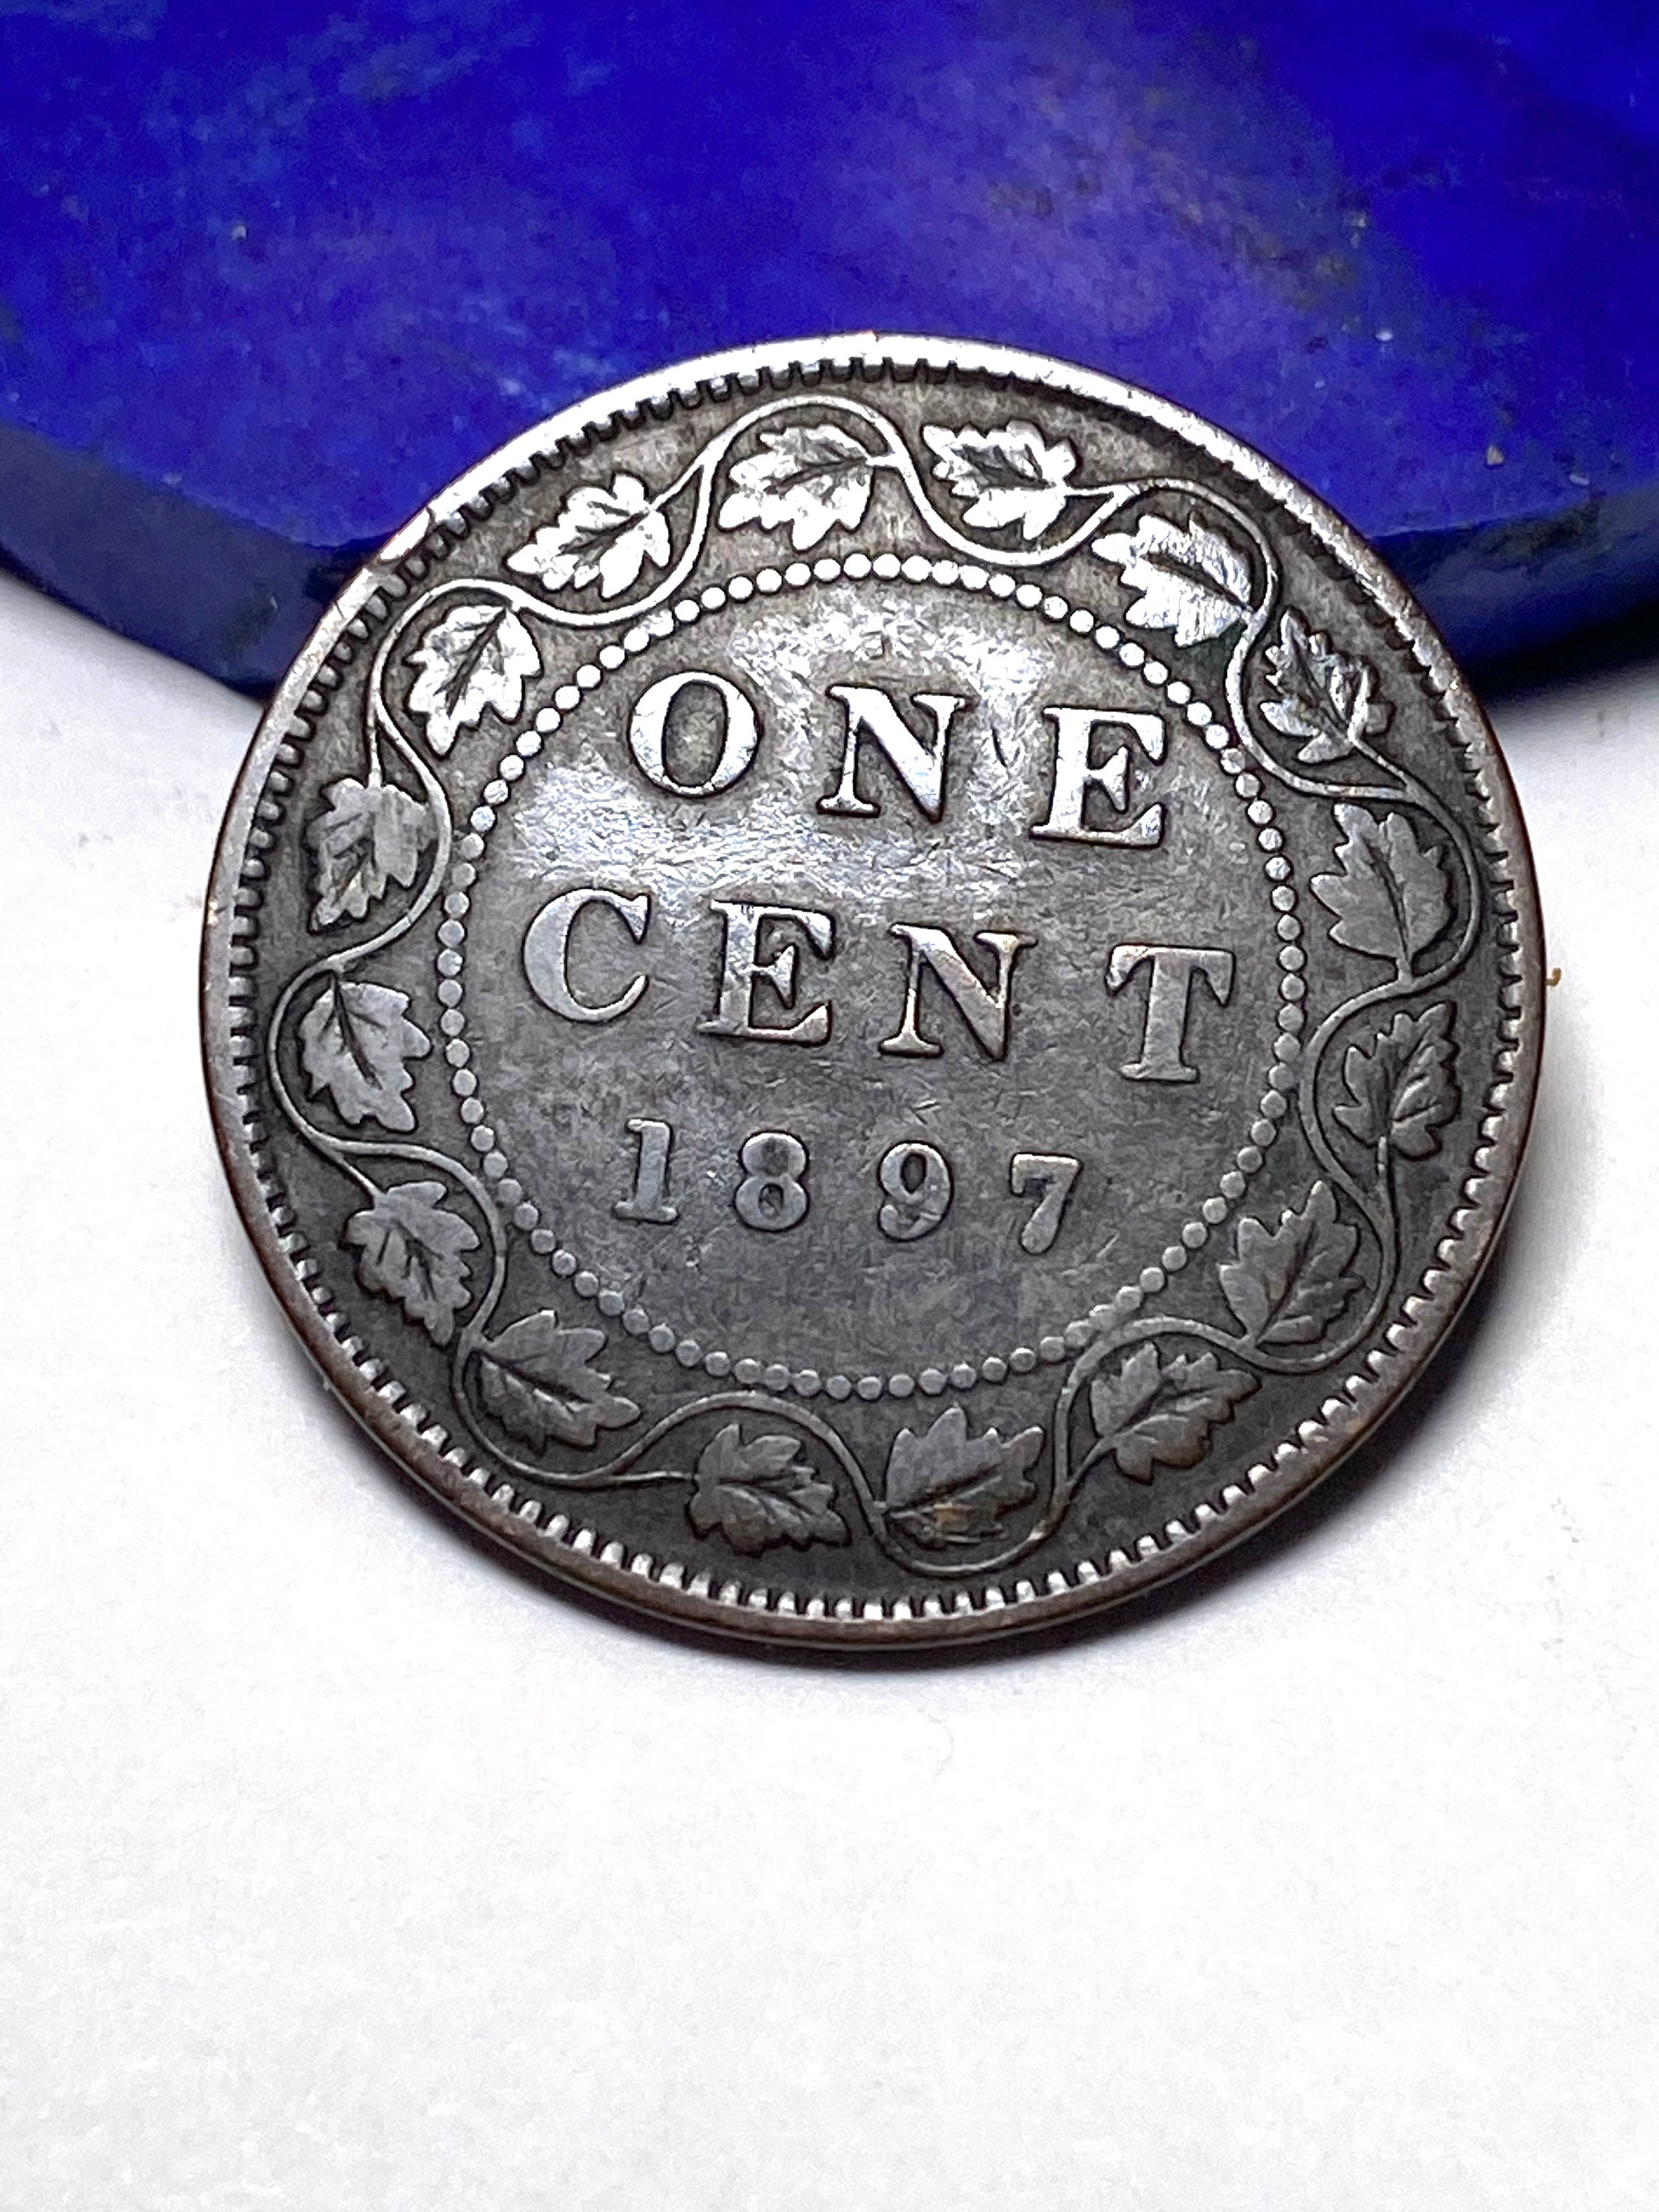 Coins and Canada - 1 cent 1900 - Proof, Proof-like, Specimen